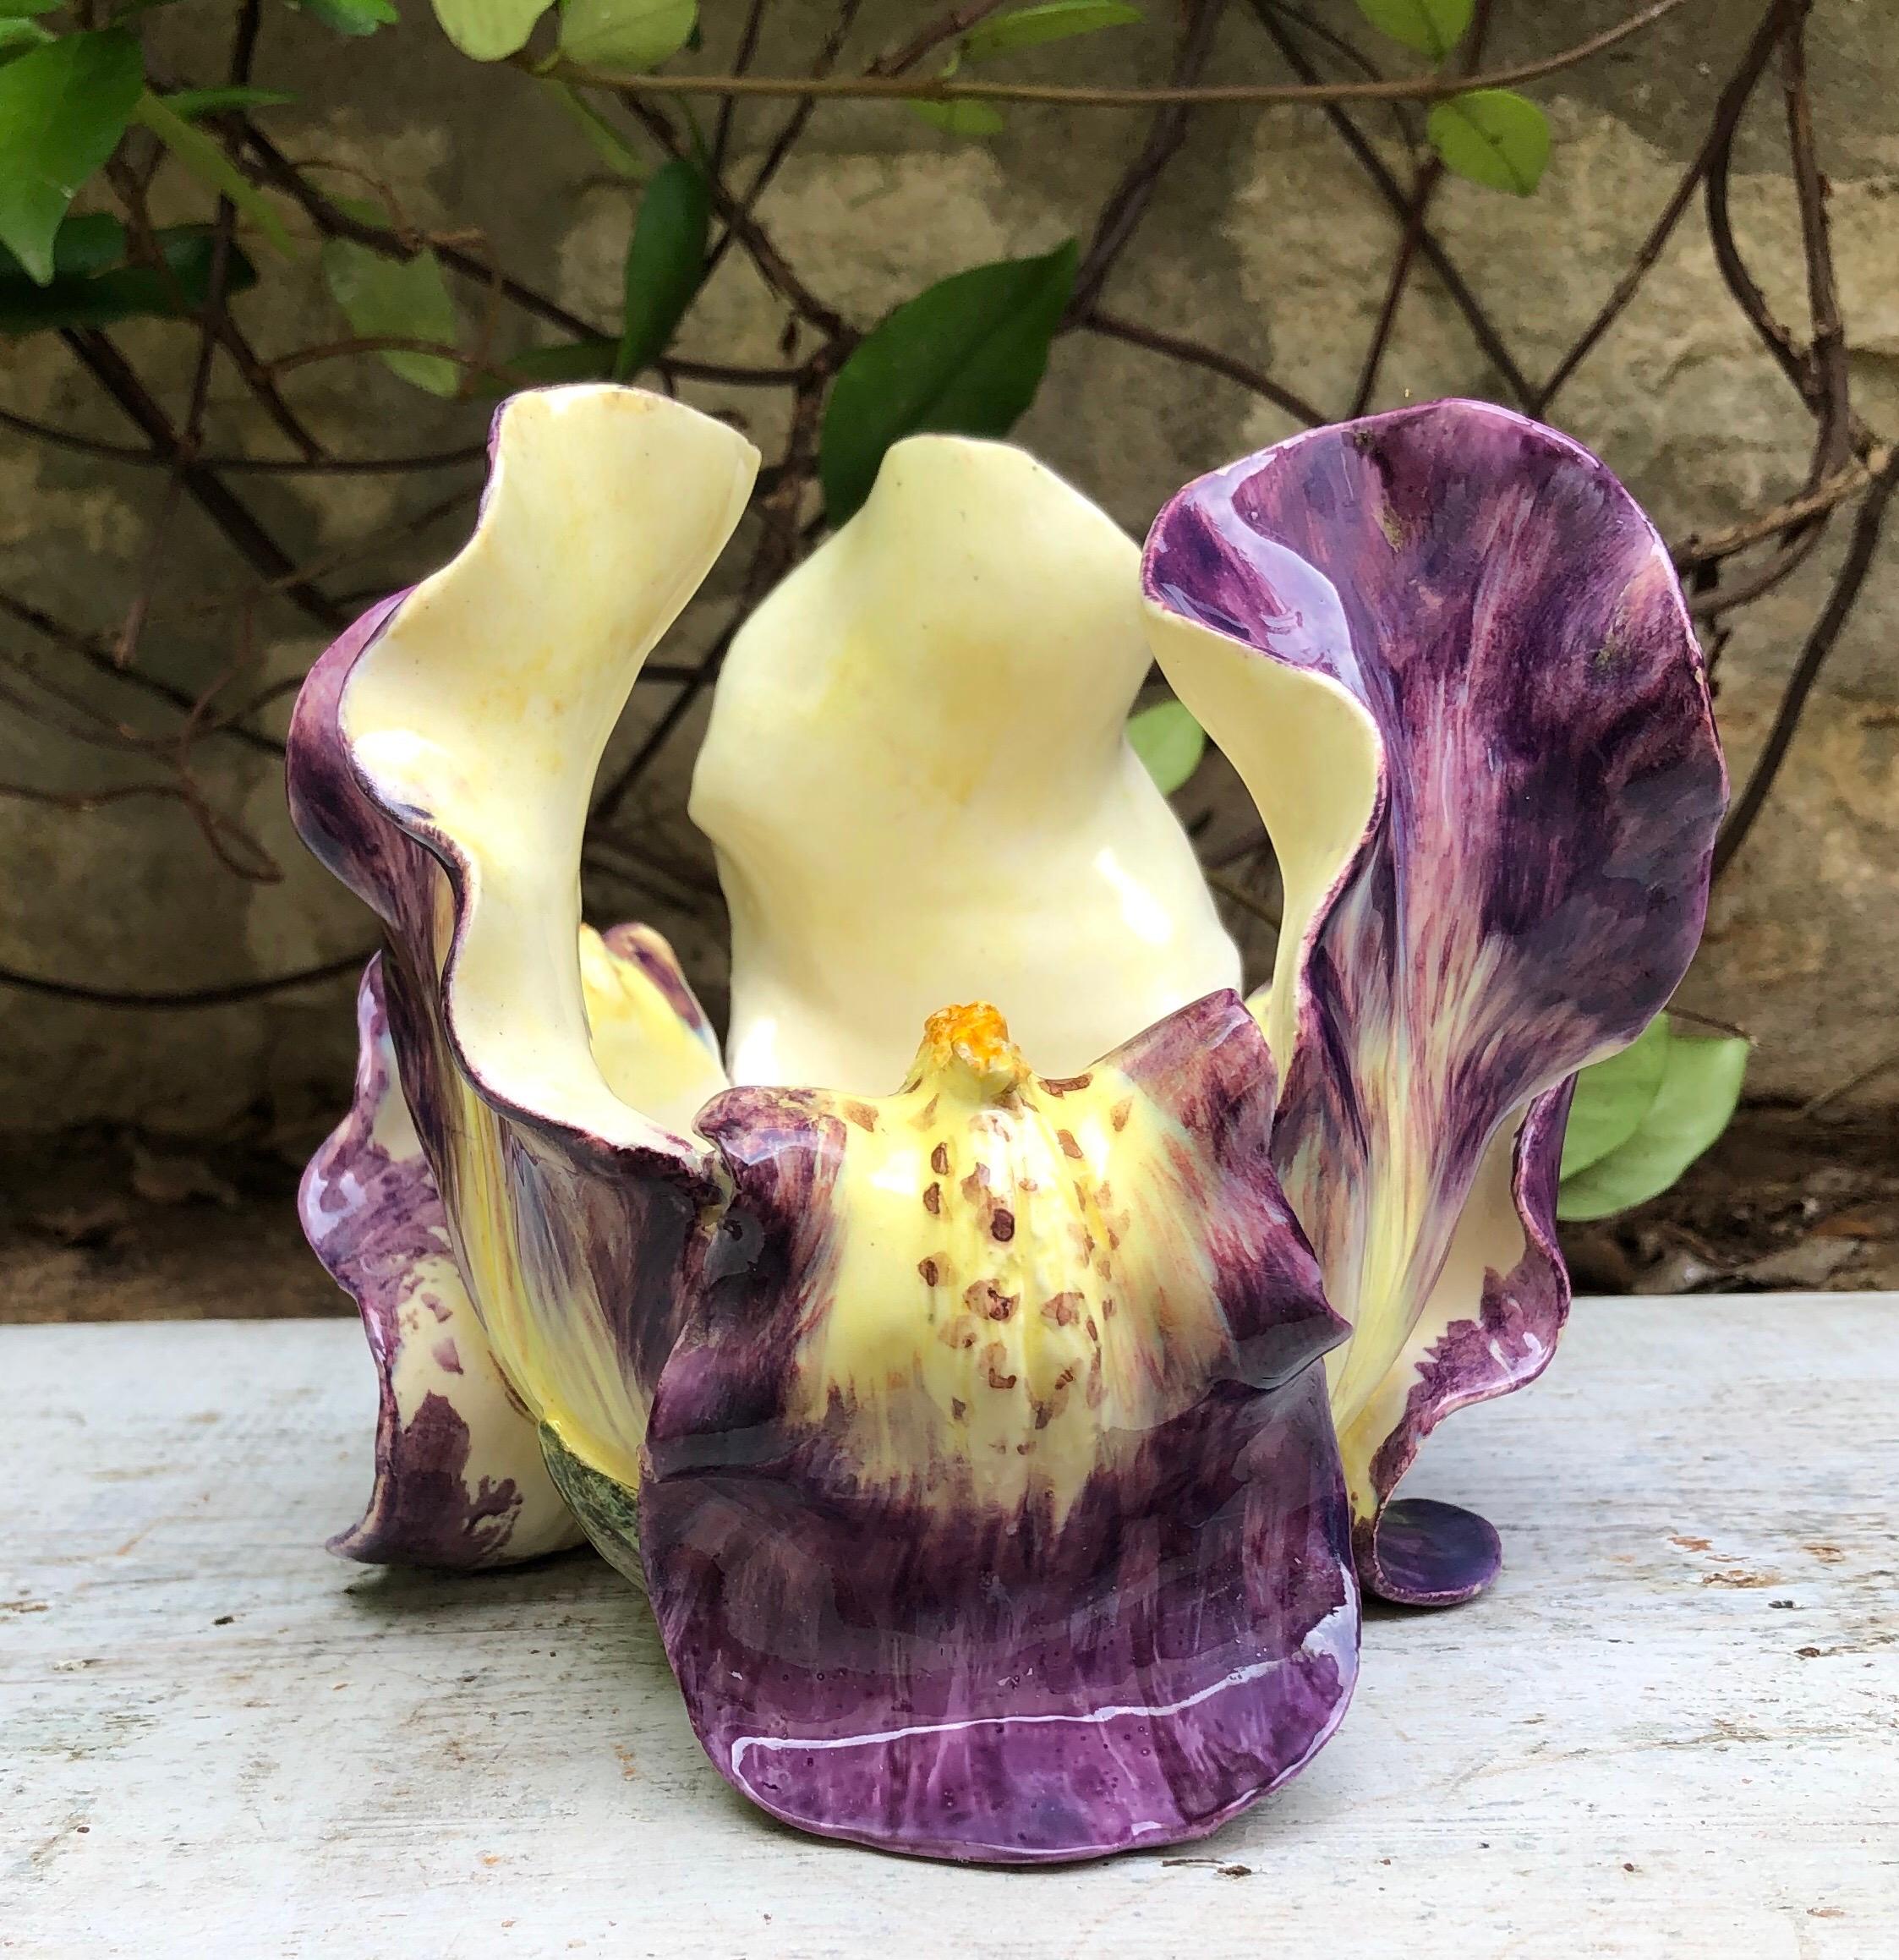 Rare 19th century Majolica Purple iris cache pot signed Delphin Massier.
The Massier family are known for the quality of their unique enamels and paintings. They produced an incredible whole range of flowers like iris, roses, daisies, wild roses,